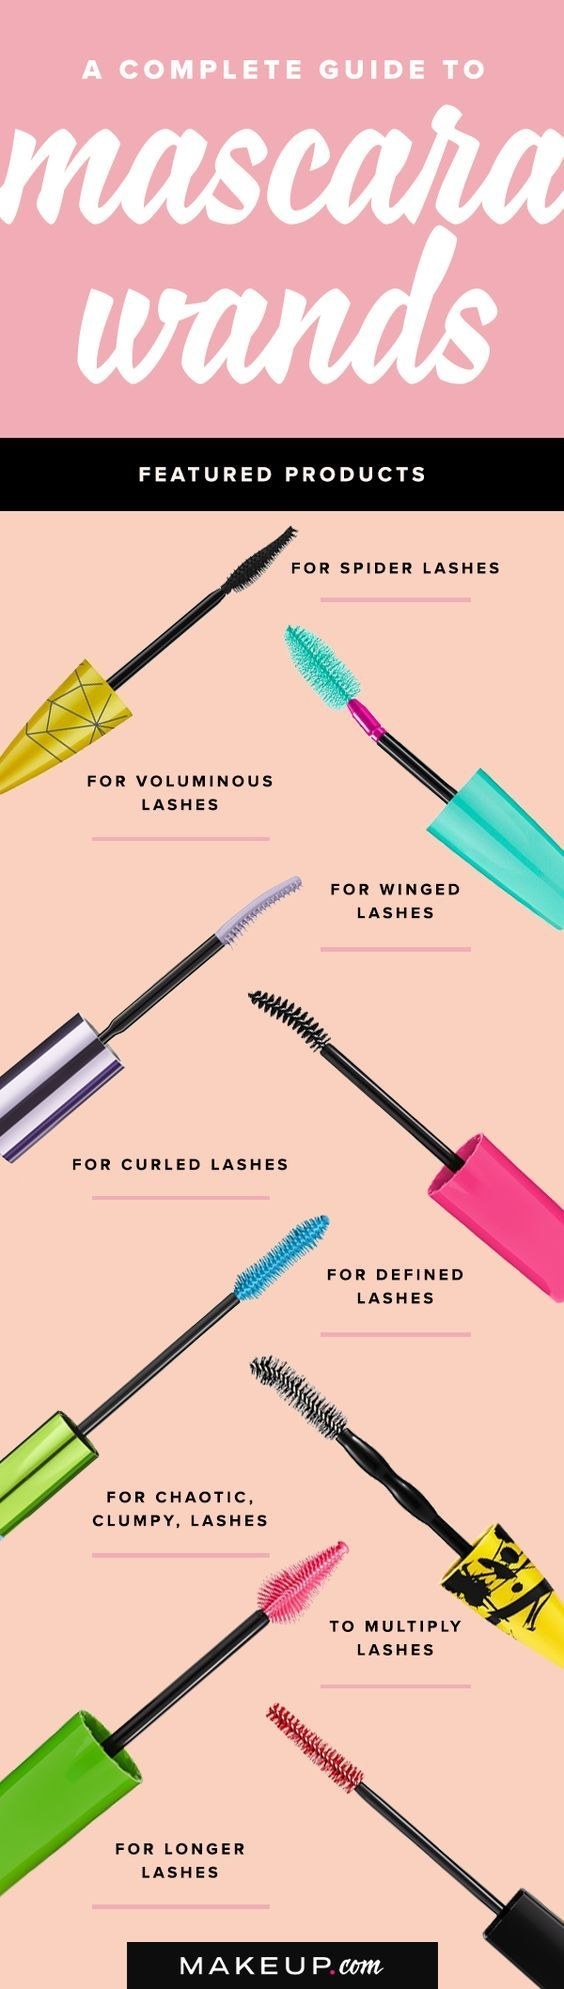 And here's a brief lesson in mascara wands.